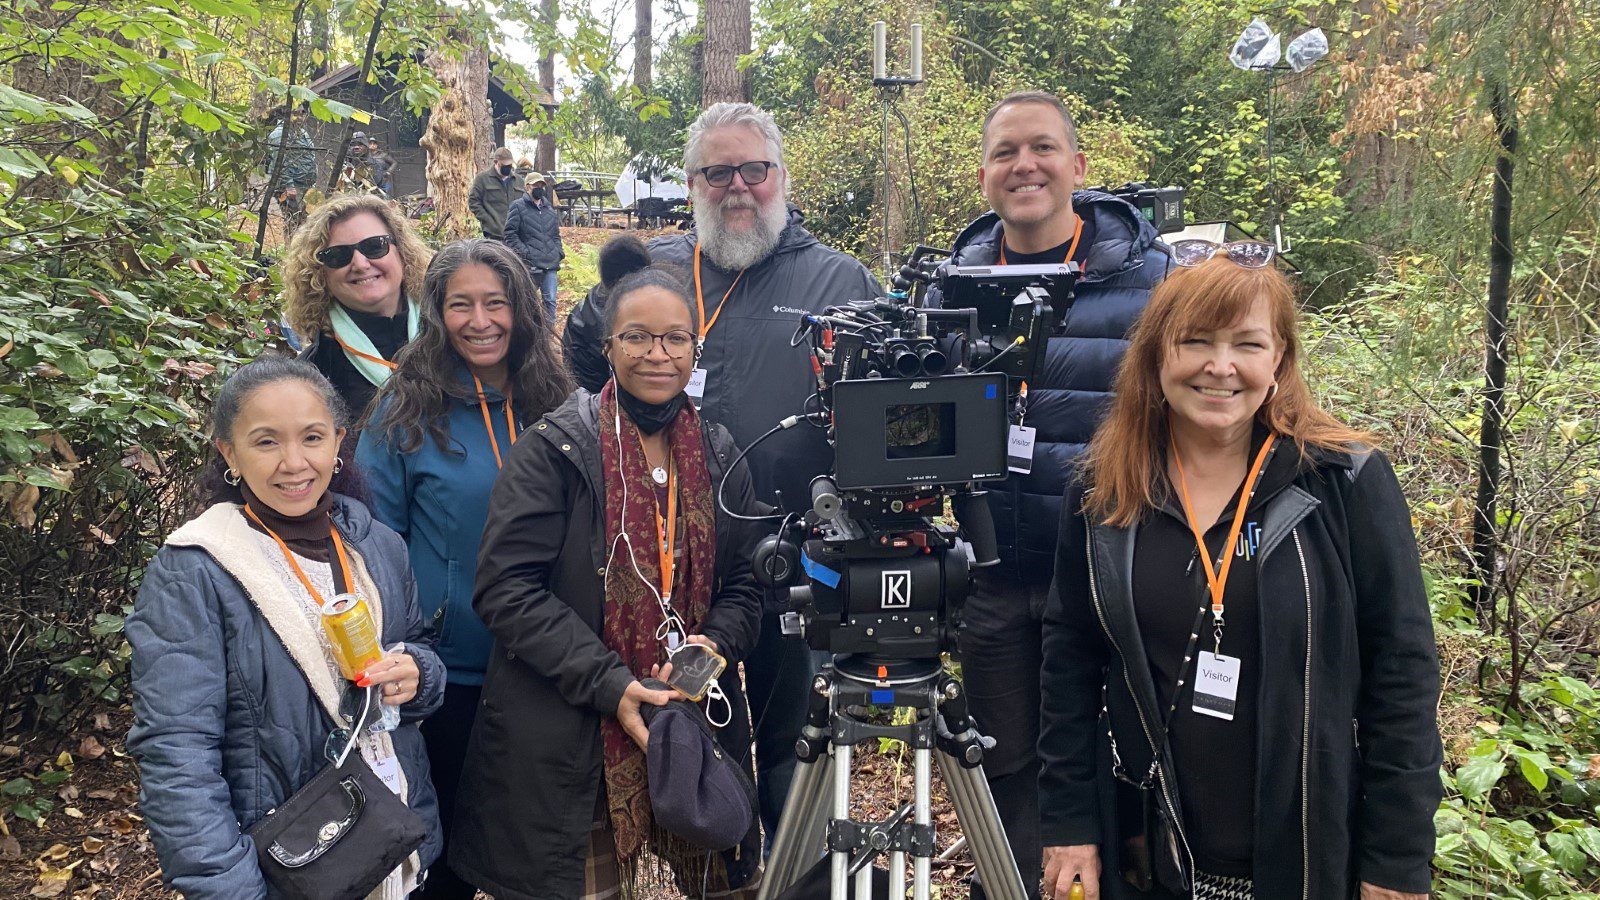 OED staff and the Penelope film crew smile for a photo.